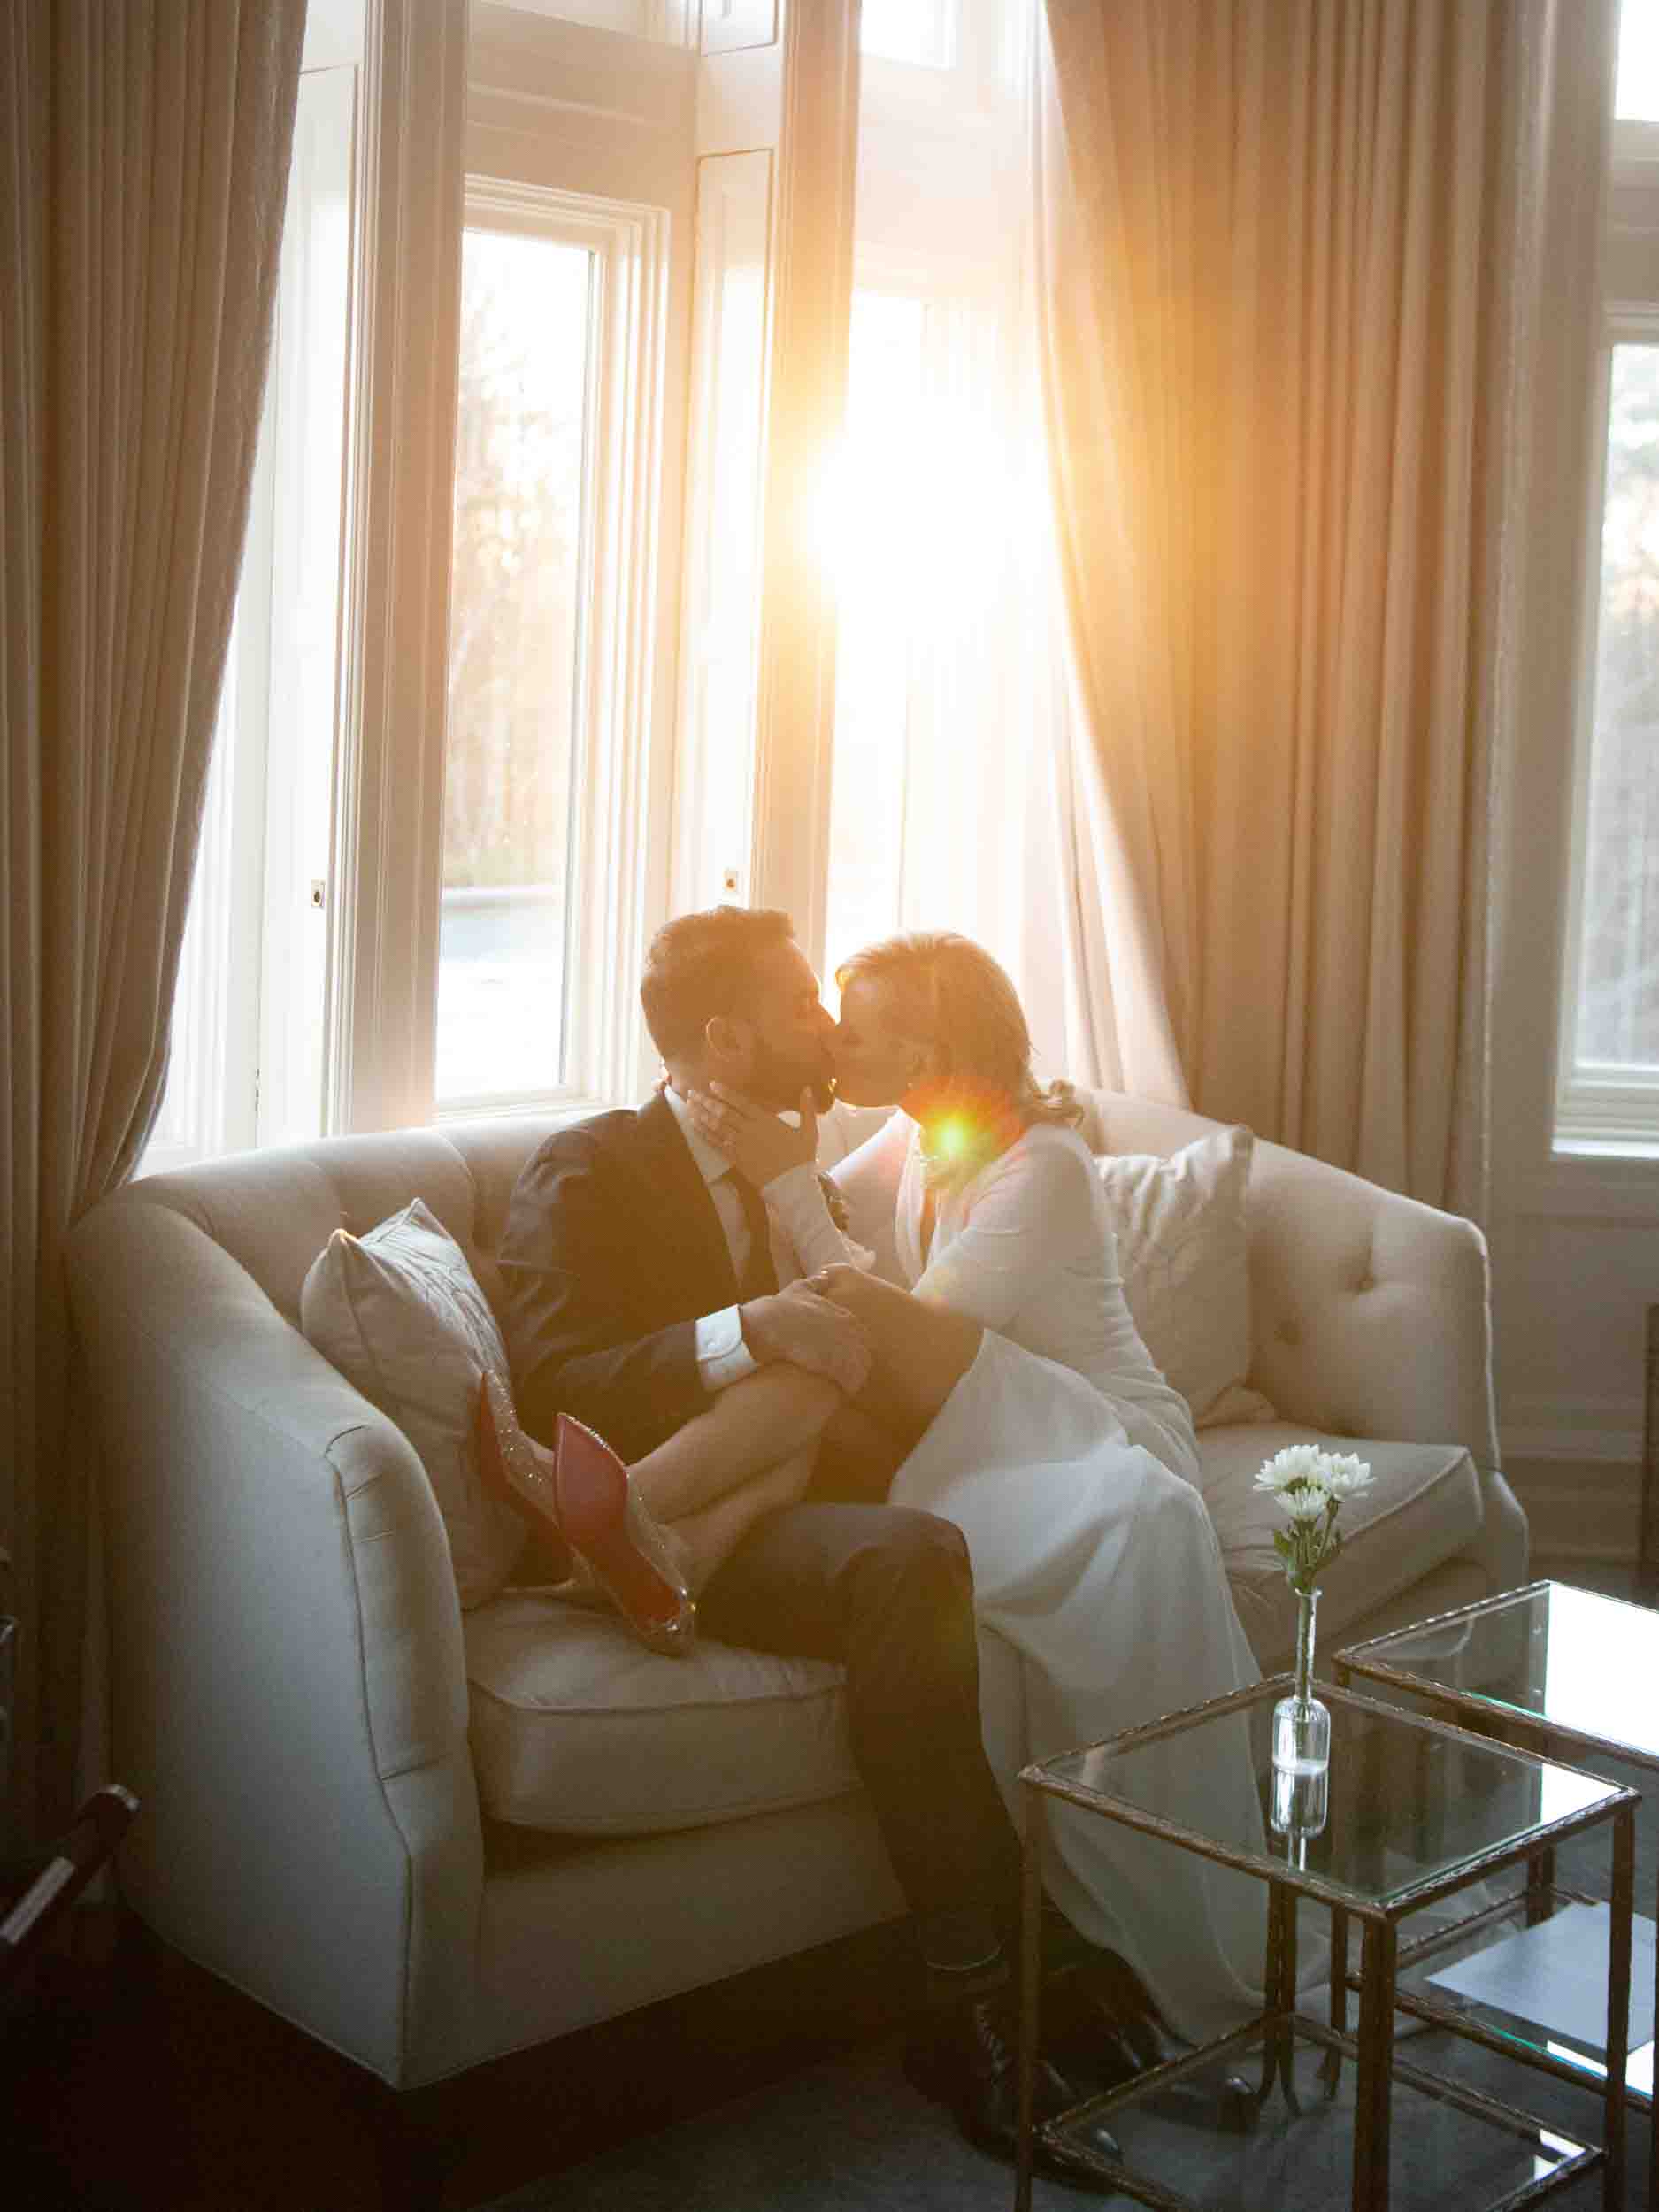 Bride and groom kissing on the couch in the sunlight at golden hour